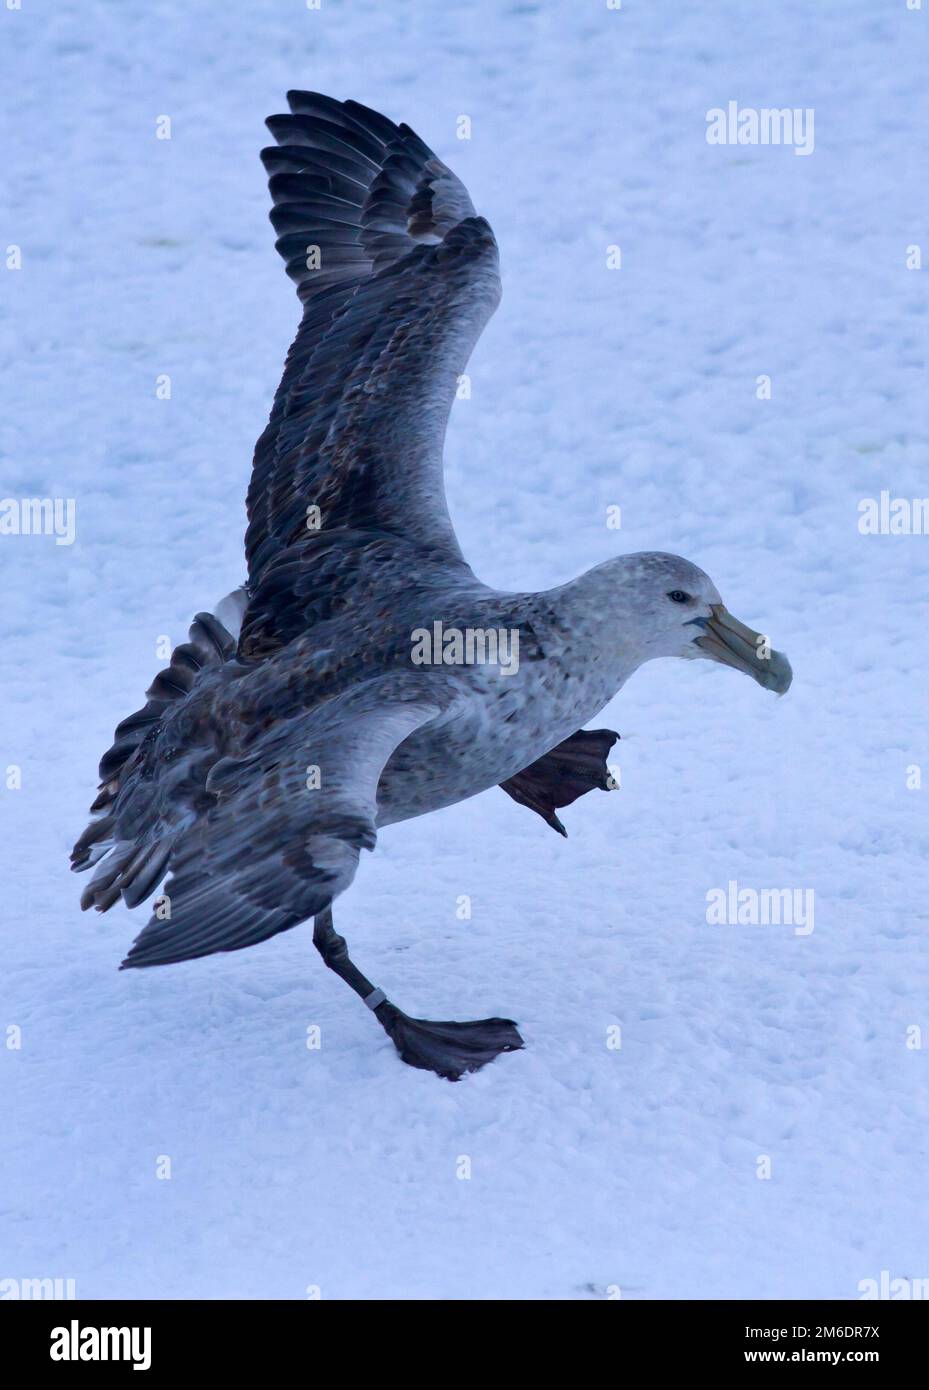 Southern giant petrel during landing on ice Stock Photo